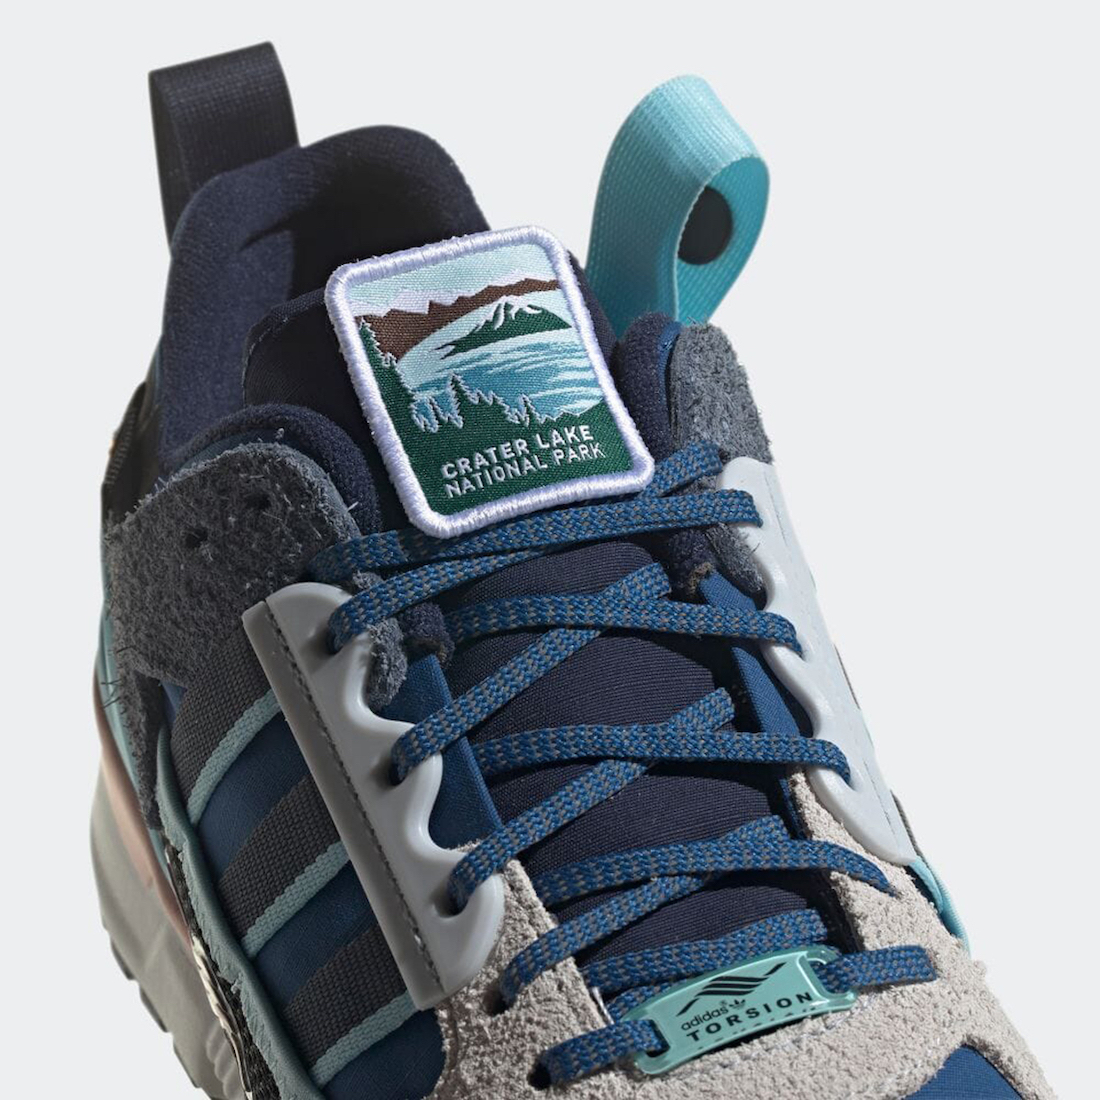 National Park Foundation adidas ZX 10000 C Crater Lake FY5173 Release Date